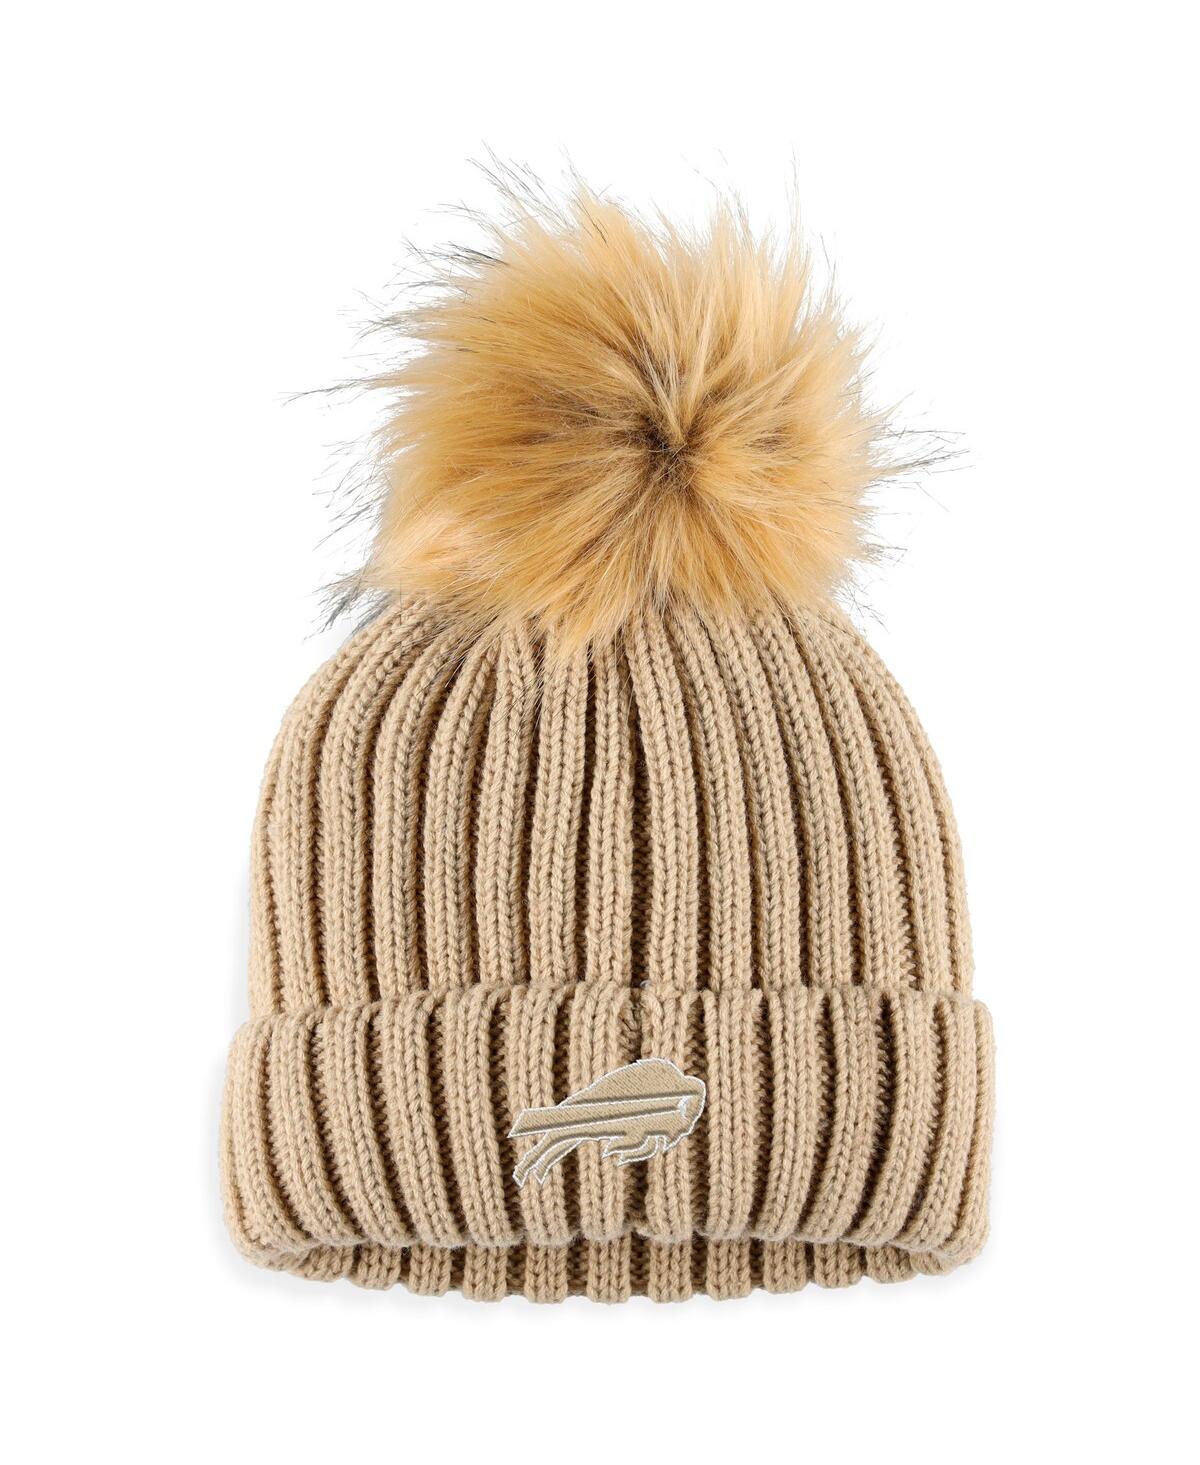 WEAR BY ERIN ANDREWS WOMEN'S WEAR BY ERIN ANDREWS NATURAL BUFFALO BILLS NEUTRAL CUFFED KNIT HAT WITH POM